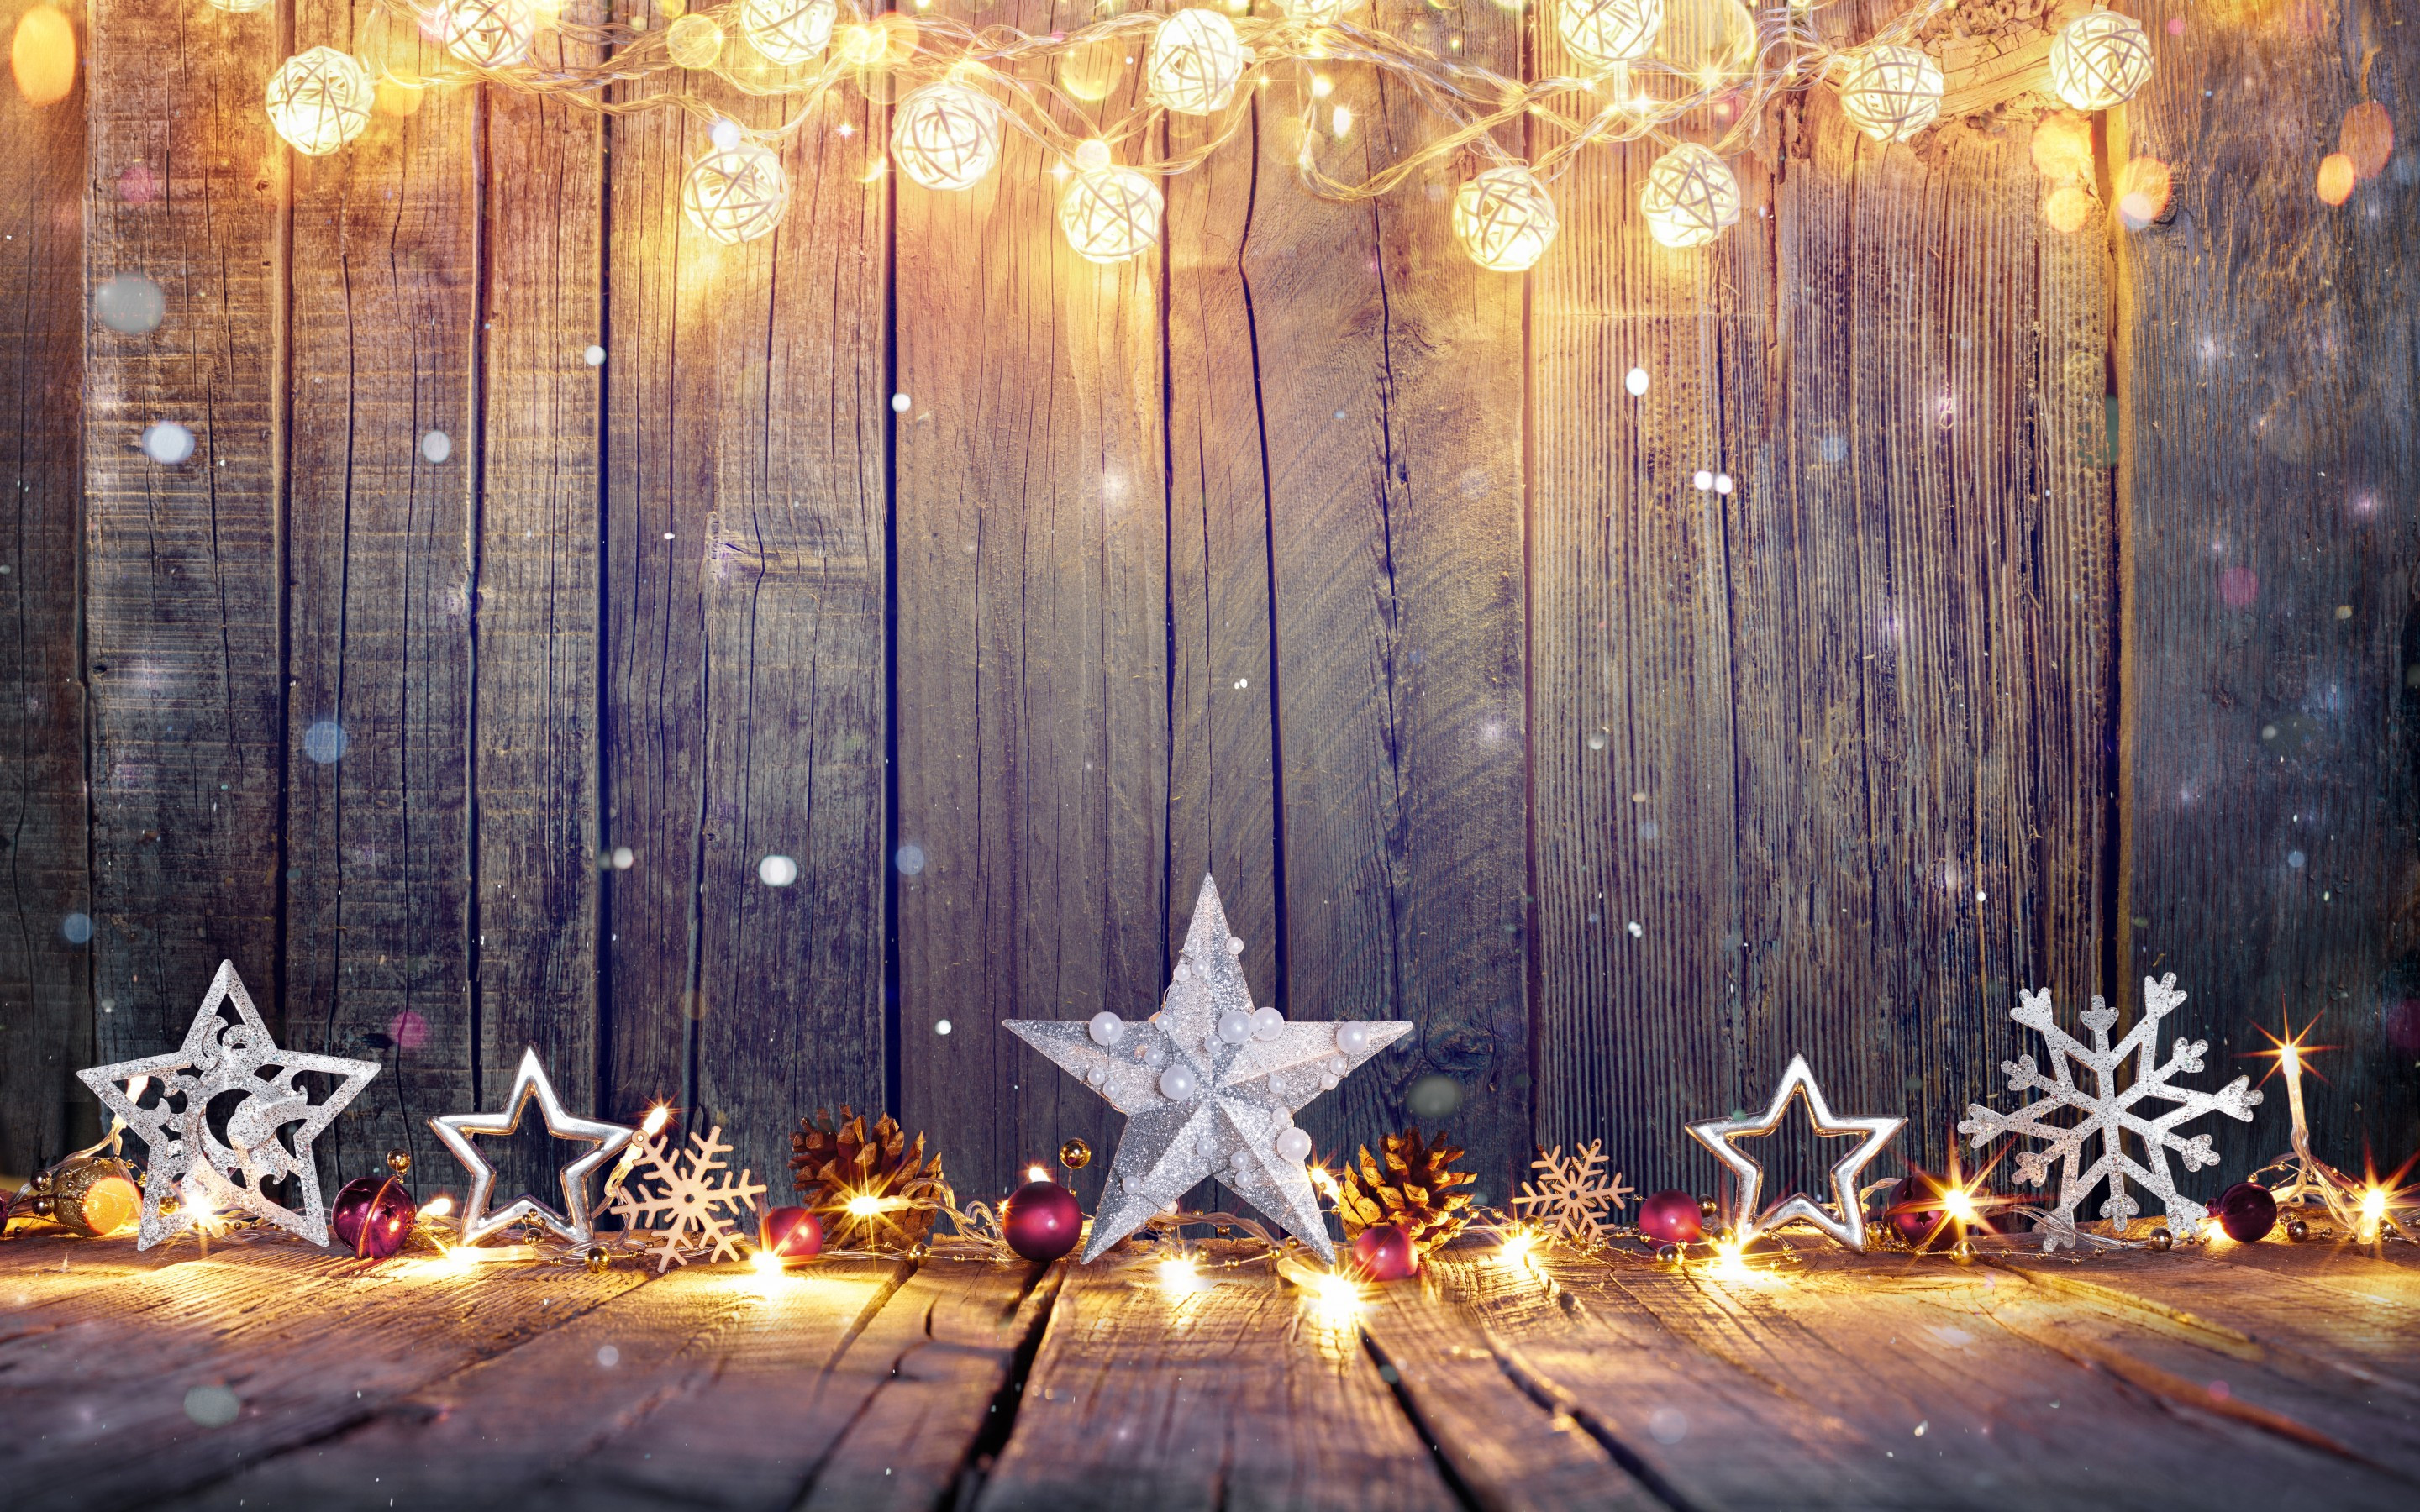 Download 2880x1800 Christmas Decorations, Lights, Holiday Wallpaper for MacBook Pro 15 inch